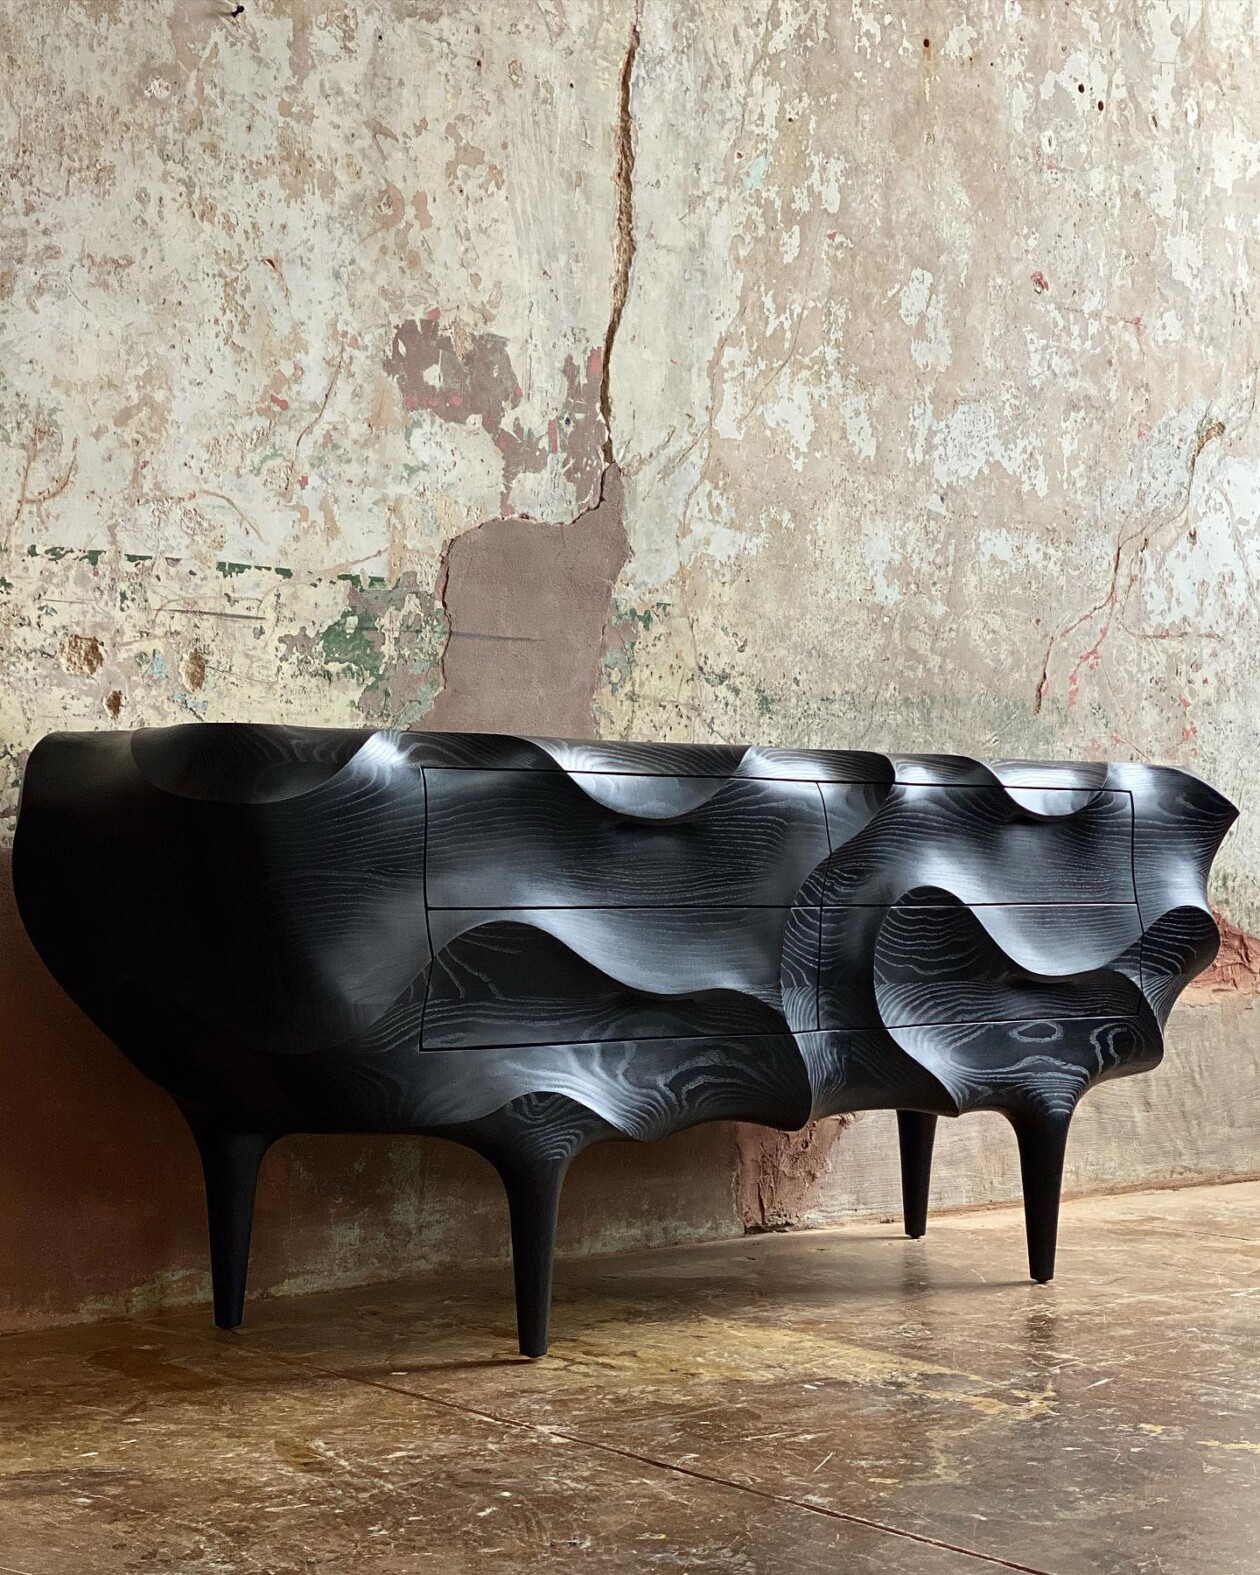 Intricately Engraved And Textured Organic Shaped Furniture By Caleb Woodard (10)